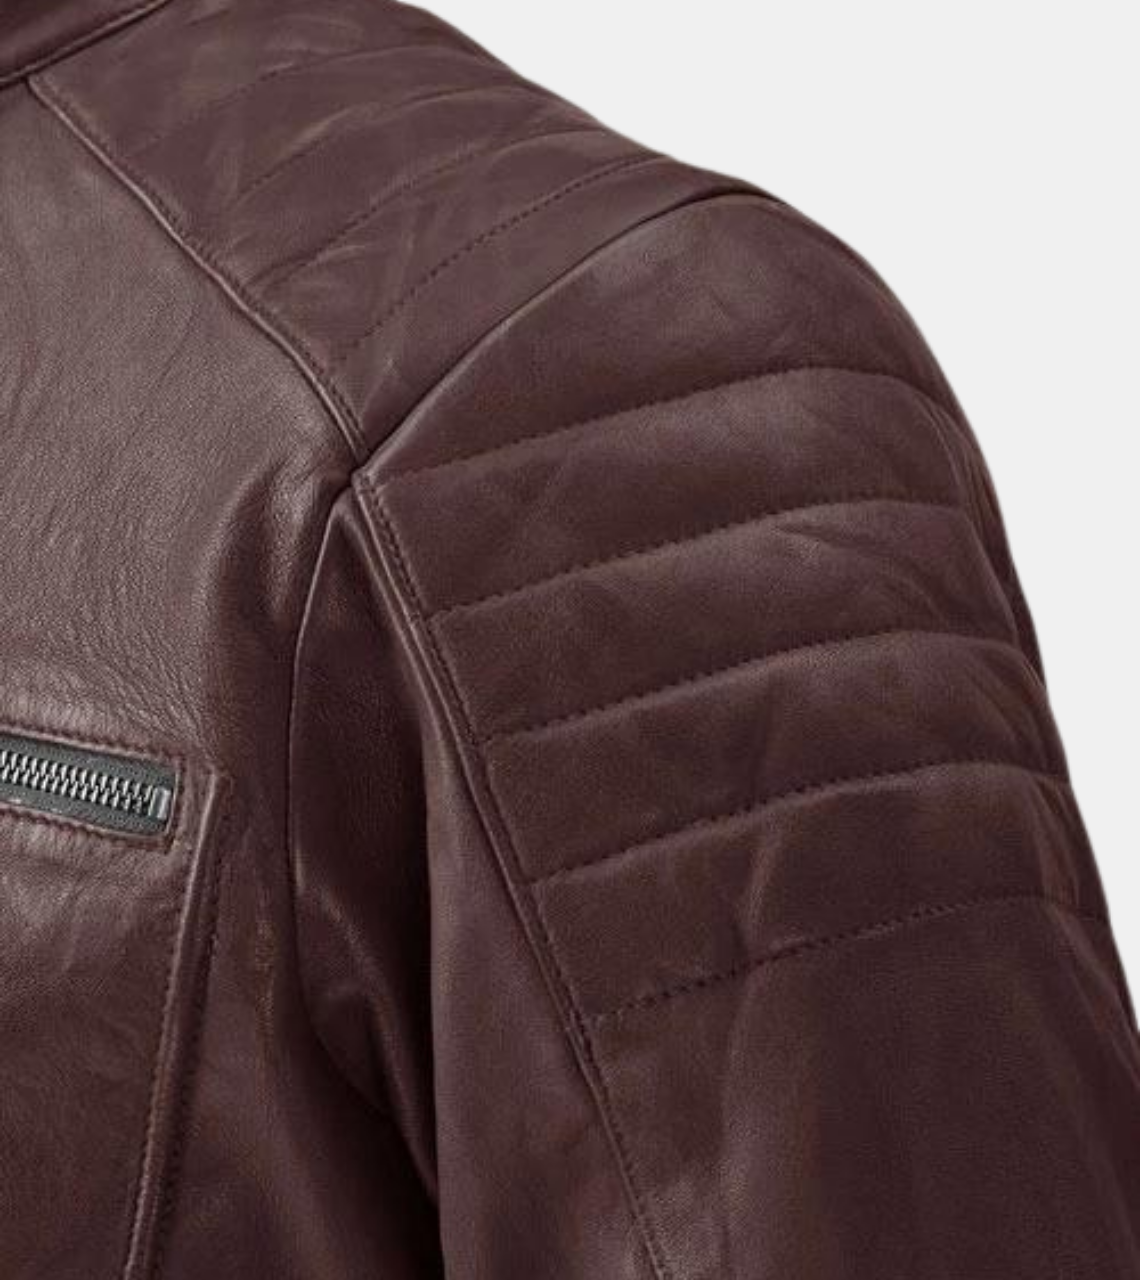 Lorenzo Men's Rosewood Quilted Leather Jacket Shoulder